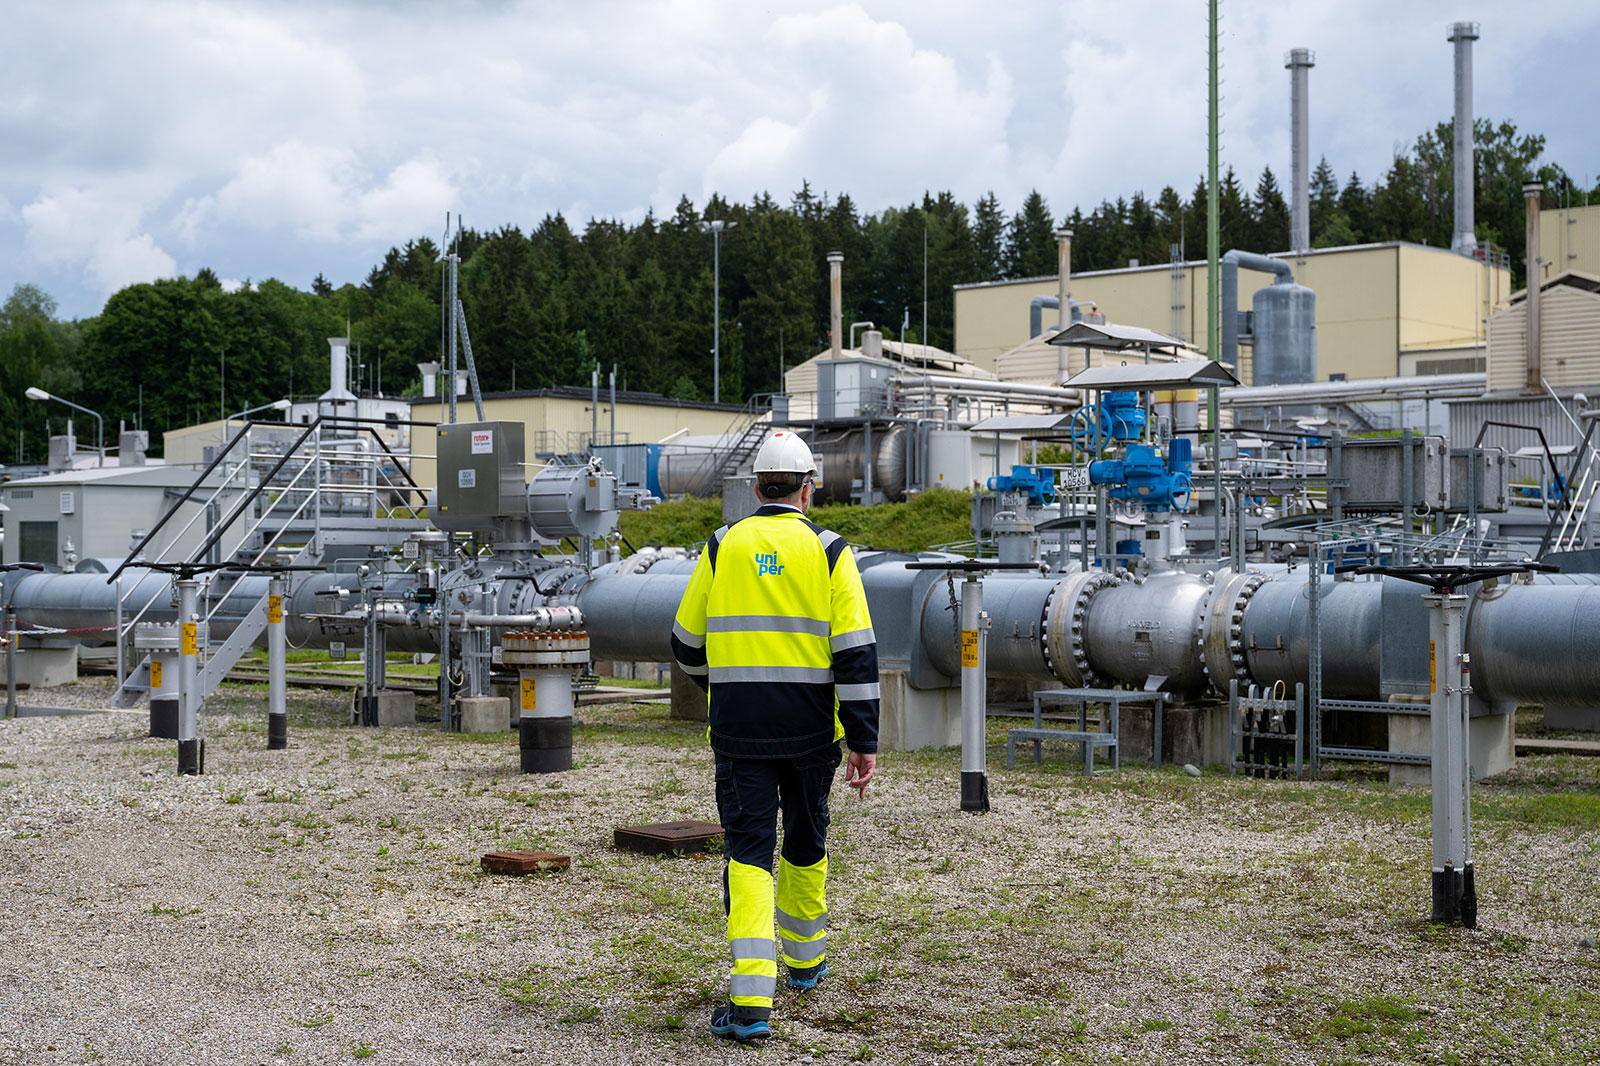 An worker walks through the above-ground facilities of a natural gas storage facility at the Uniper Energy Storage facility in Bierwang, Germany, on June 10.